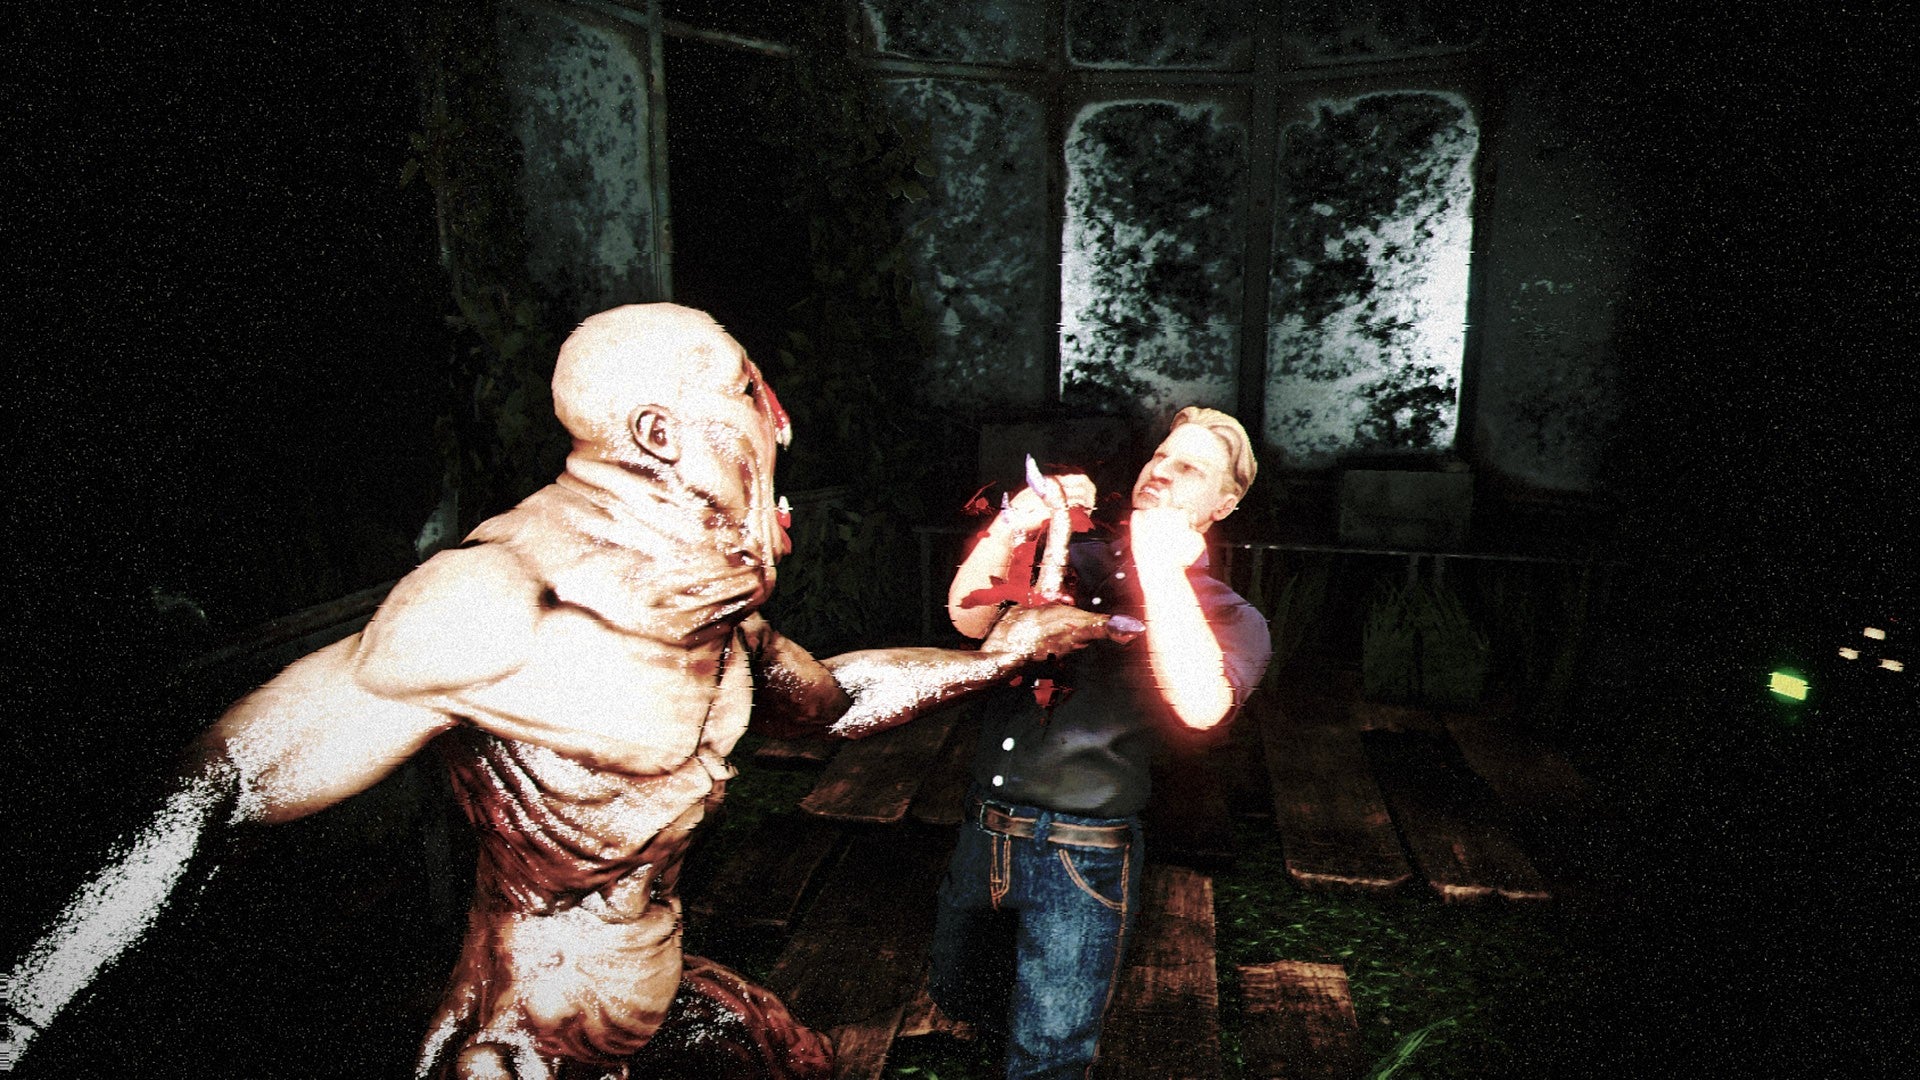 White Noise 2 image showing the monster grabbing a player and screaming in their face.